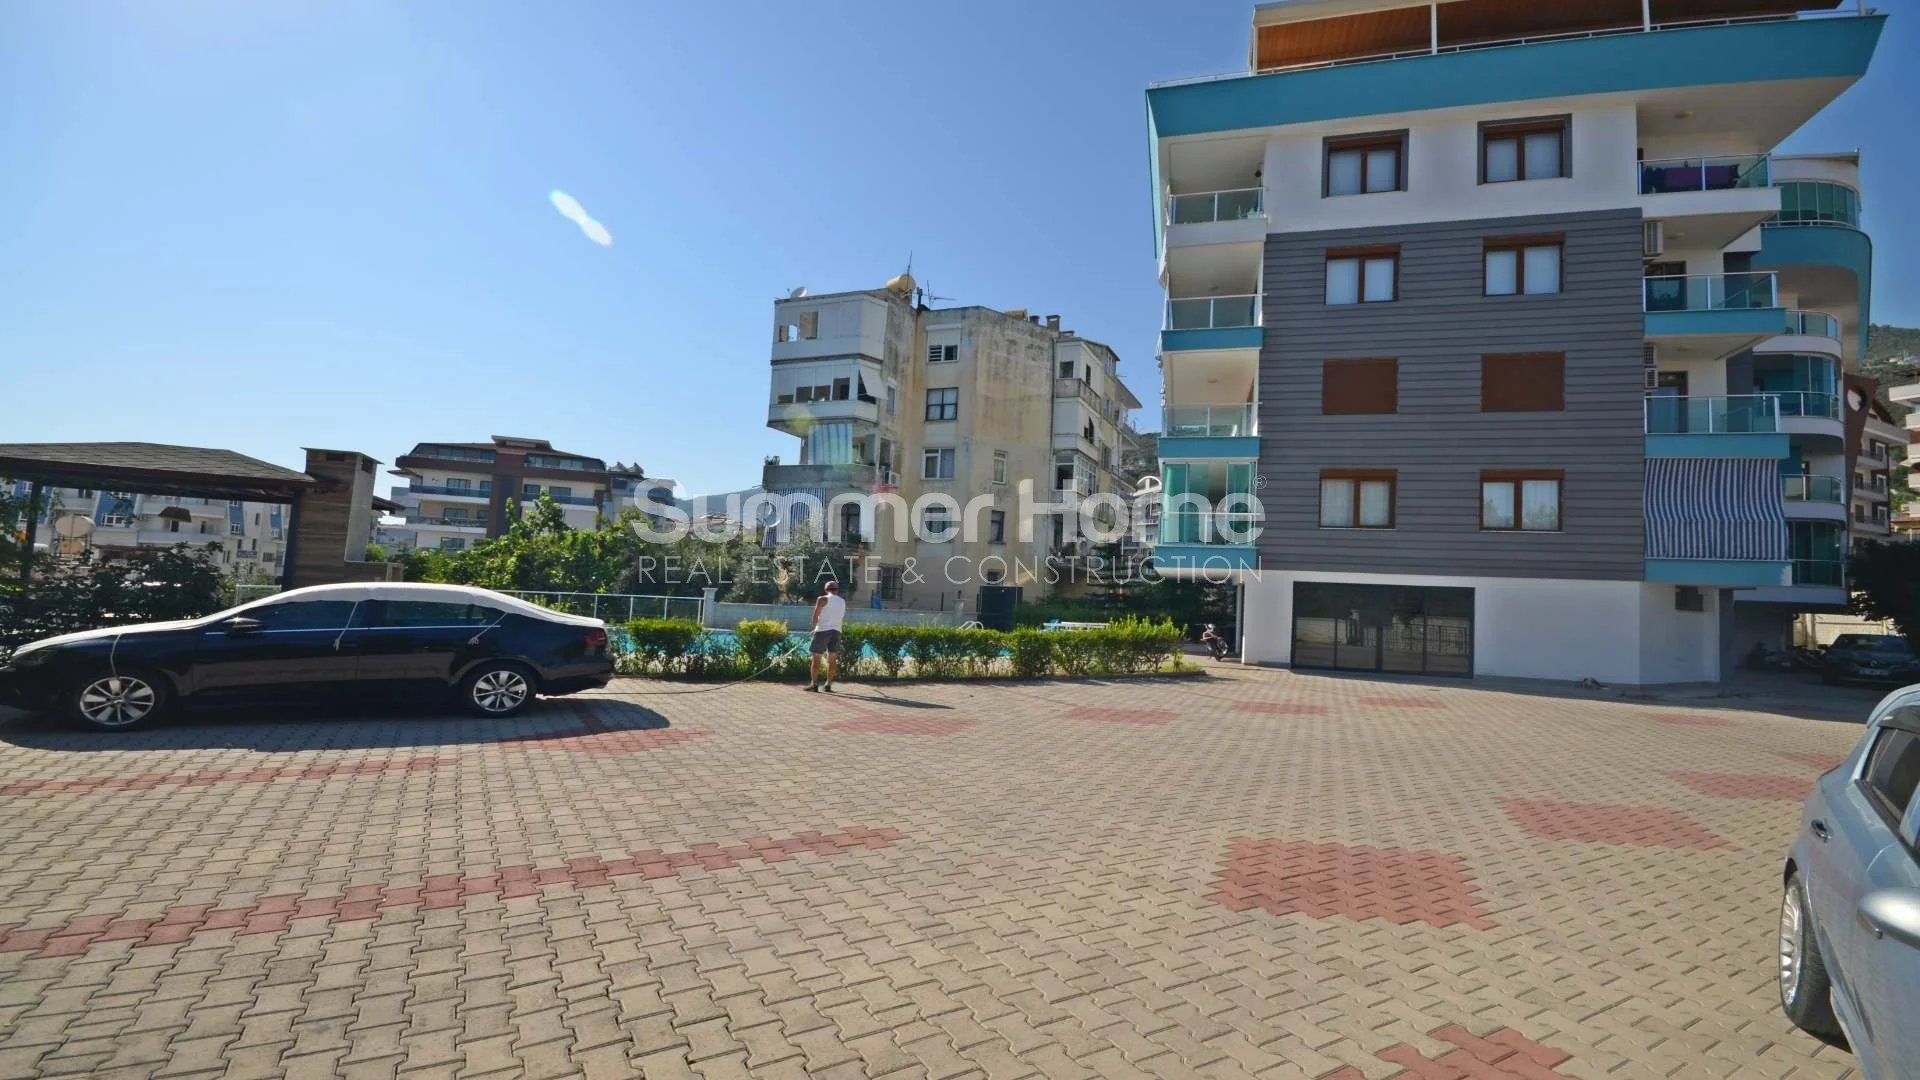 For sale Apartment Alanya Hasbahce general - 4